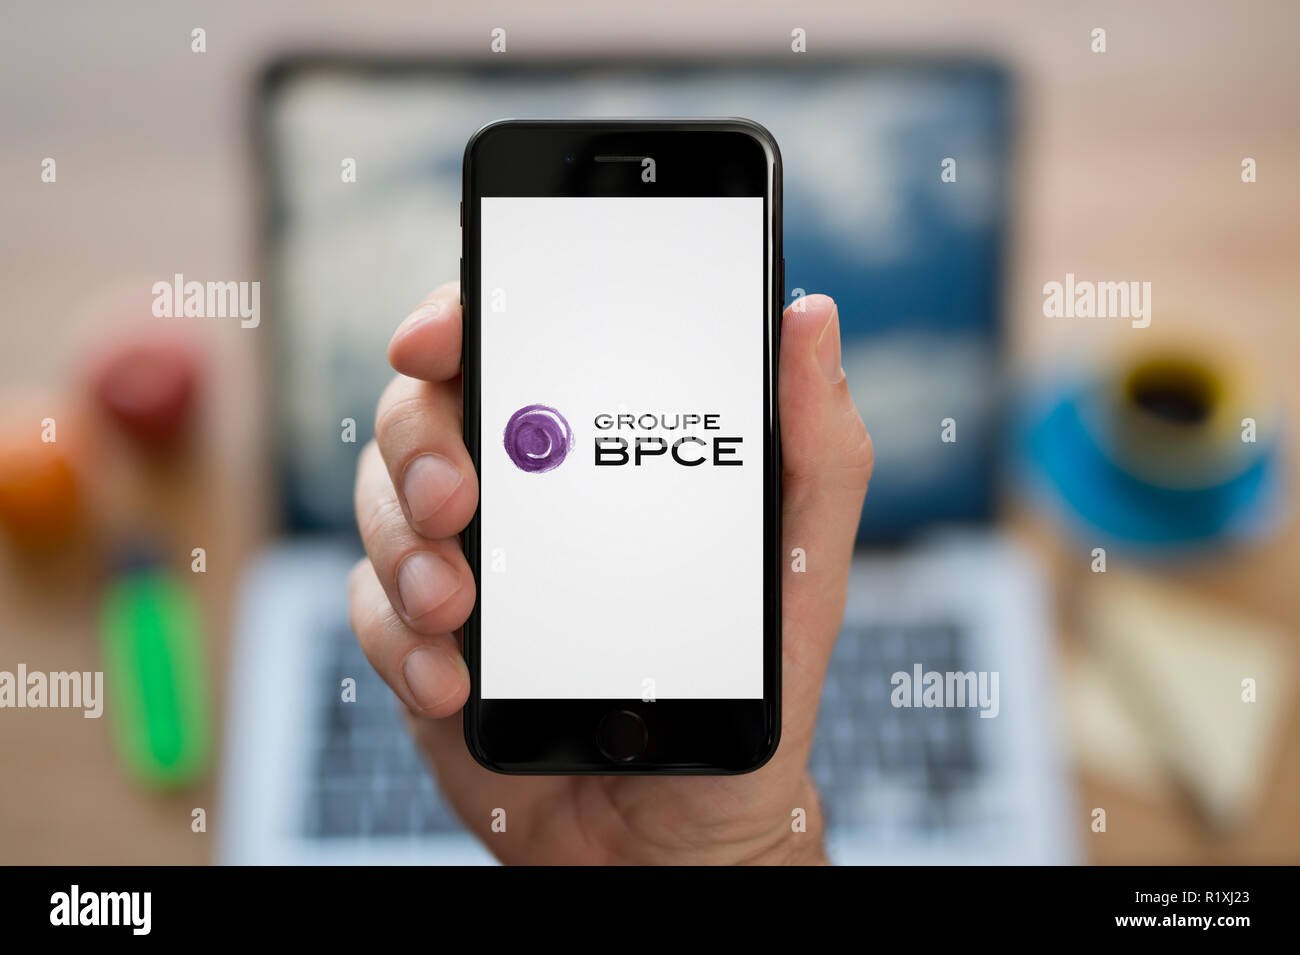 A man looks at his iPhone which displays the Groupe BPCE logo, while sat at his computer desk (Editorial use only). Stock Photo